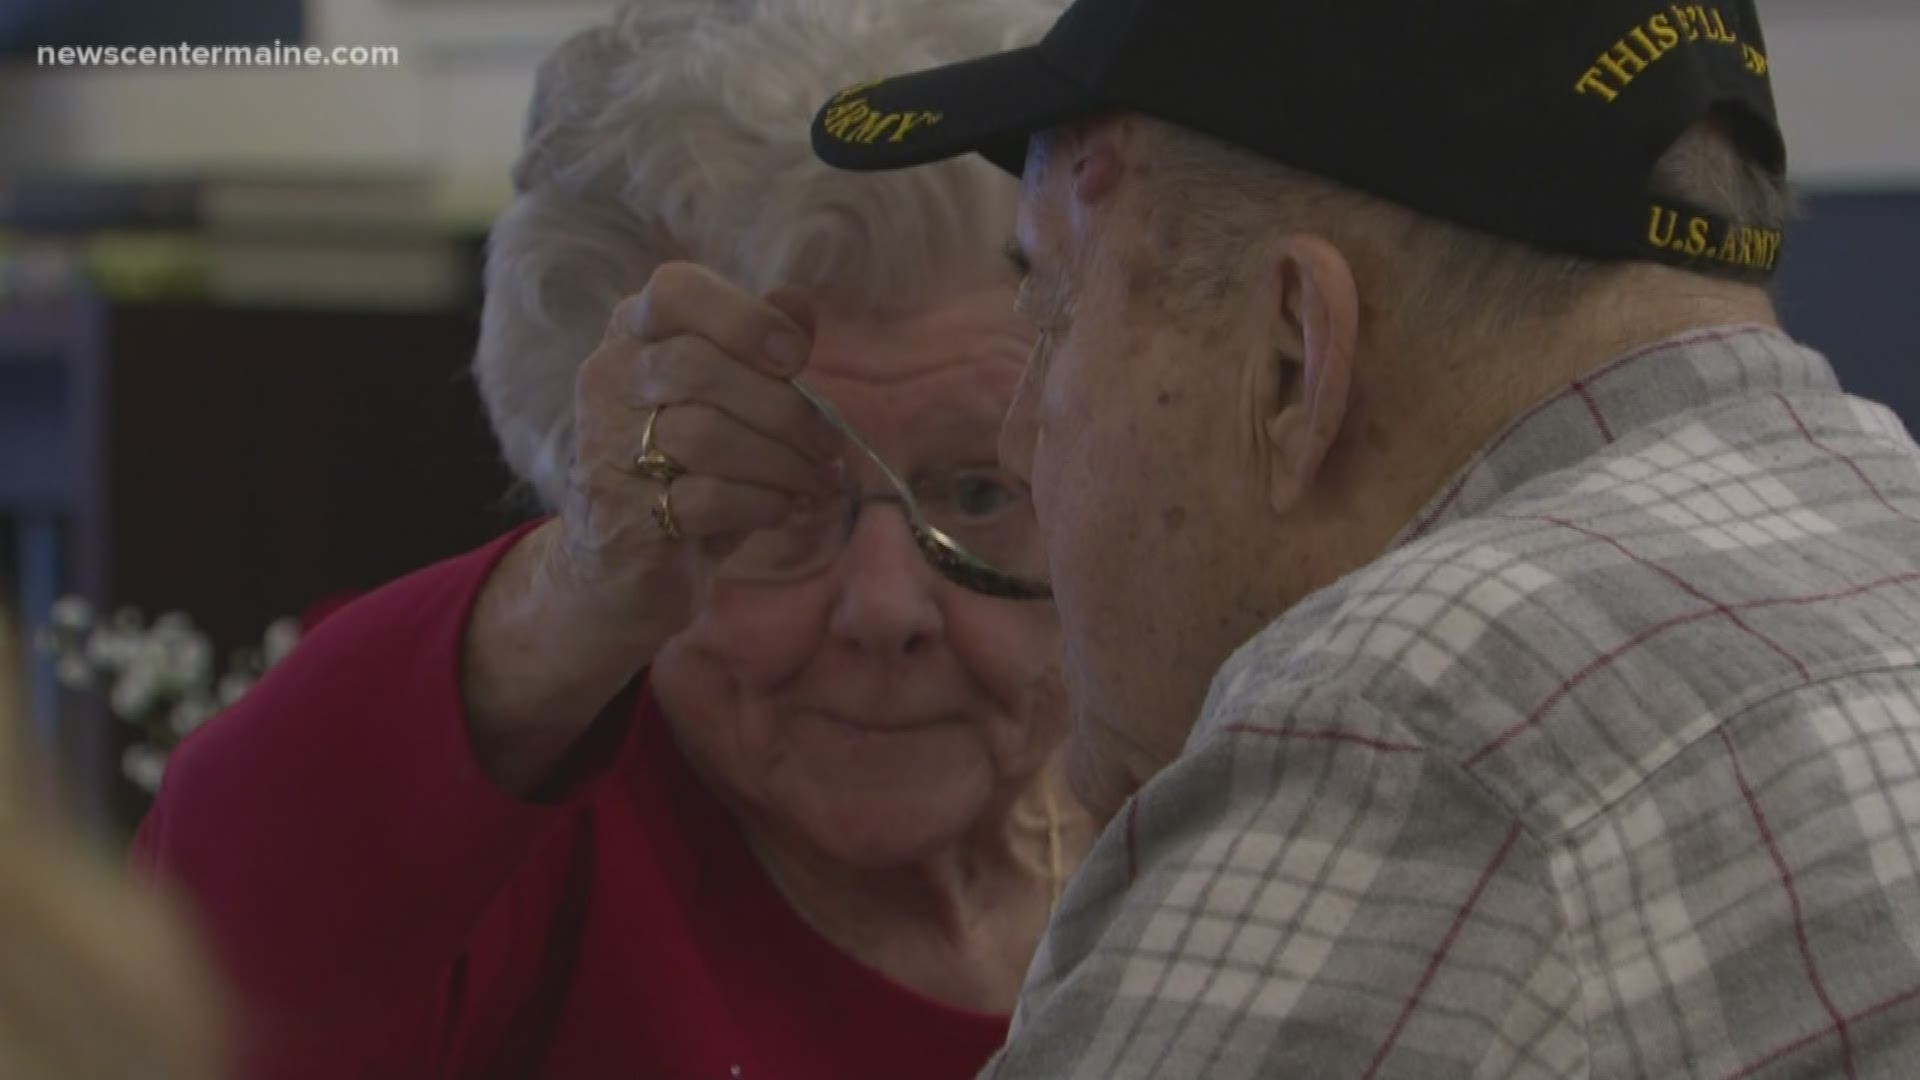 Love letters from 57 years of marriage or Valentine's Day cards from complete strangers, the Scarborough veterans home was full of love on Friday